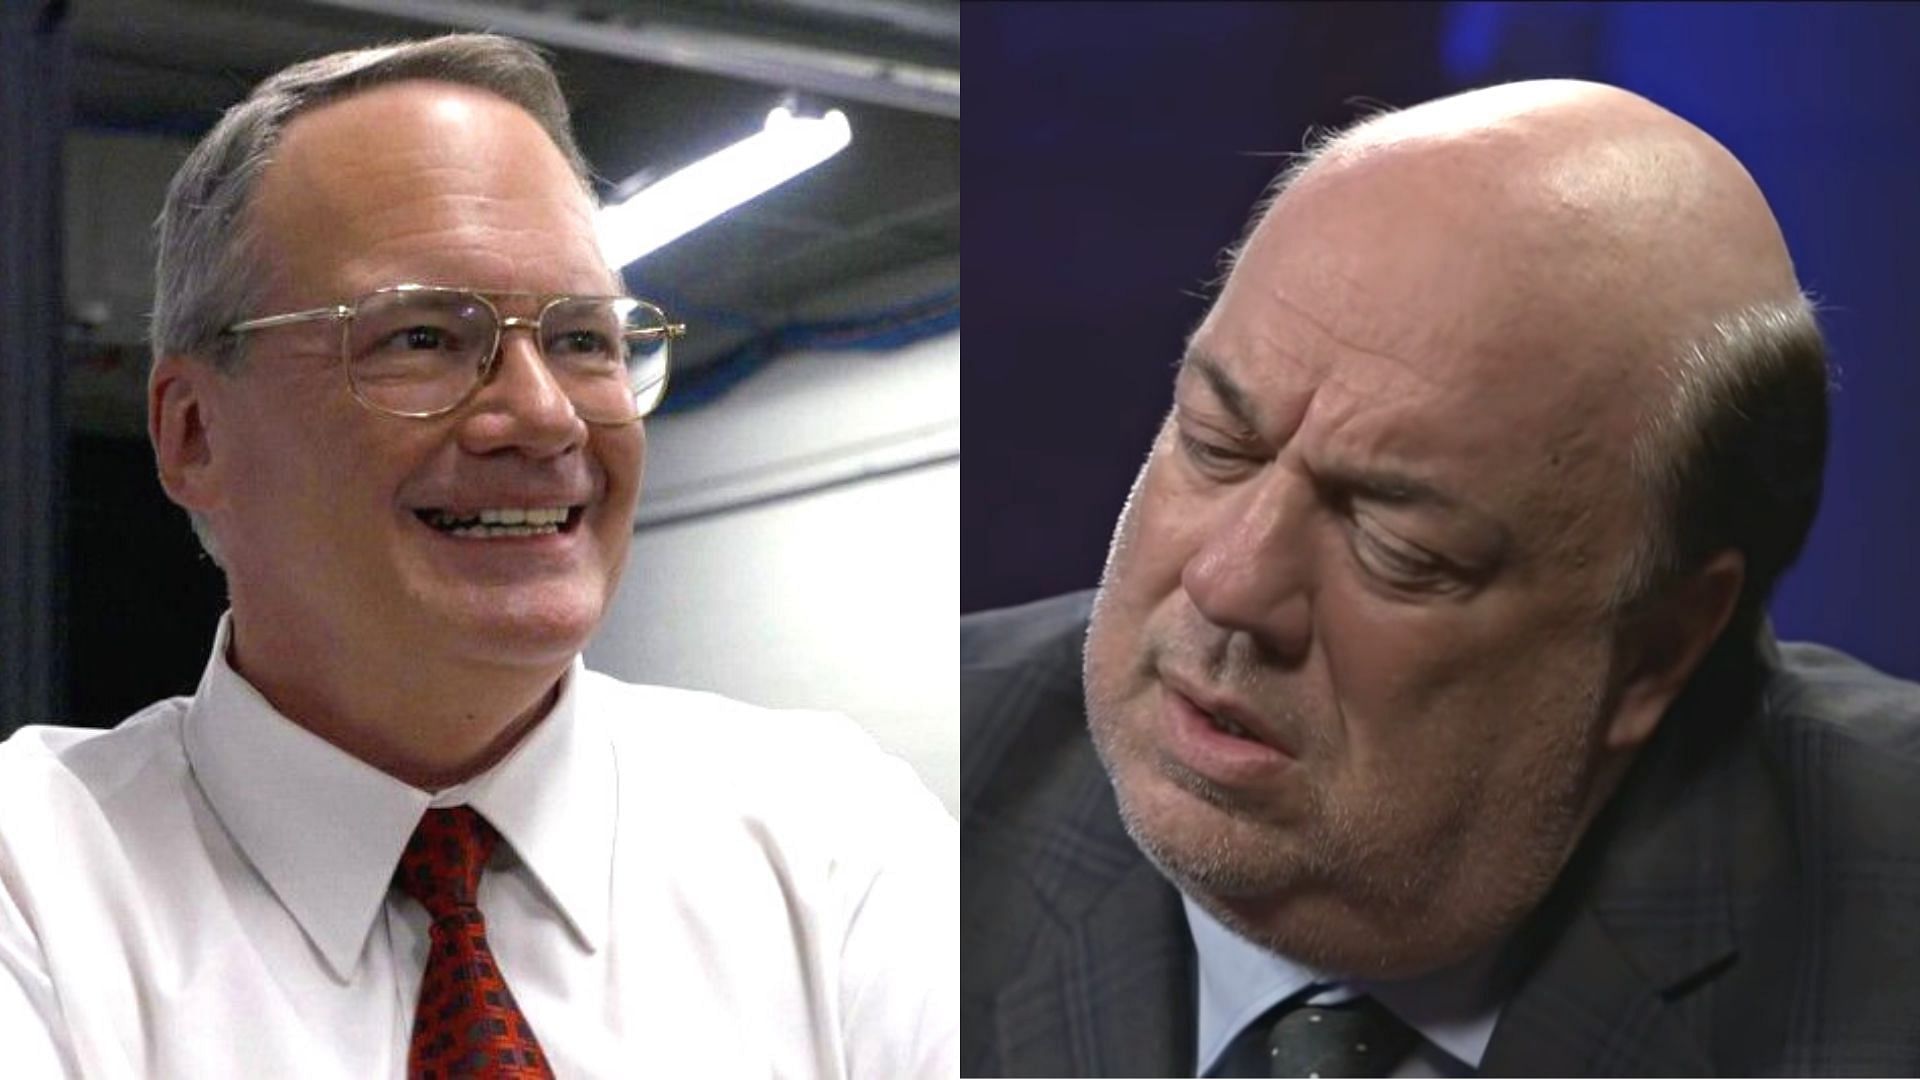 Jim Cornette and Paul Heyman are two of the greatest minds in wrestling.